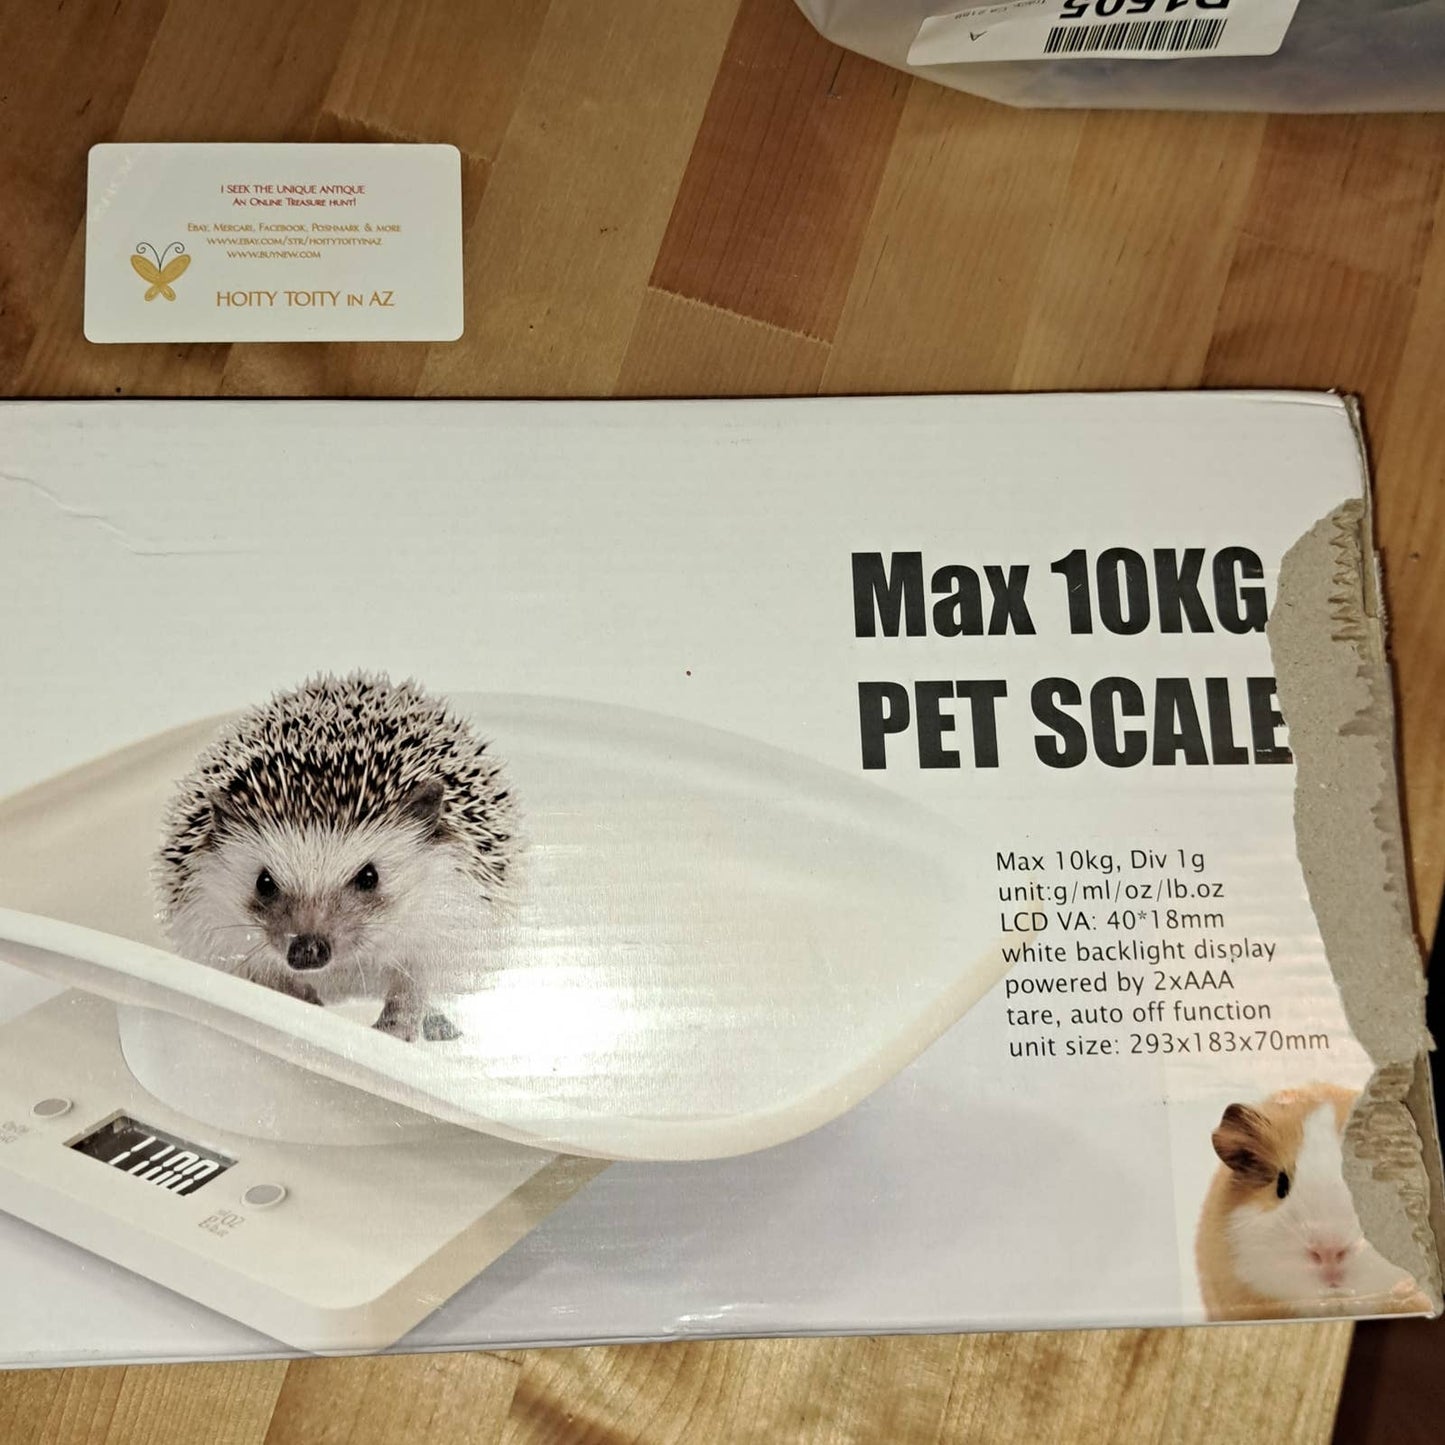 Digital Baby, pet food Scales with LCD Display-small 22 lbs max